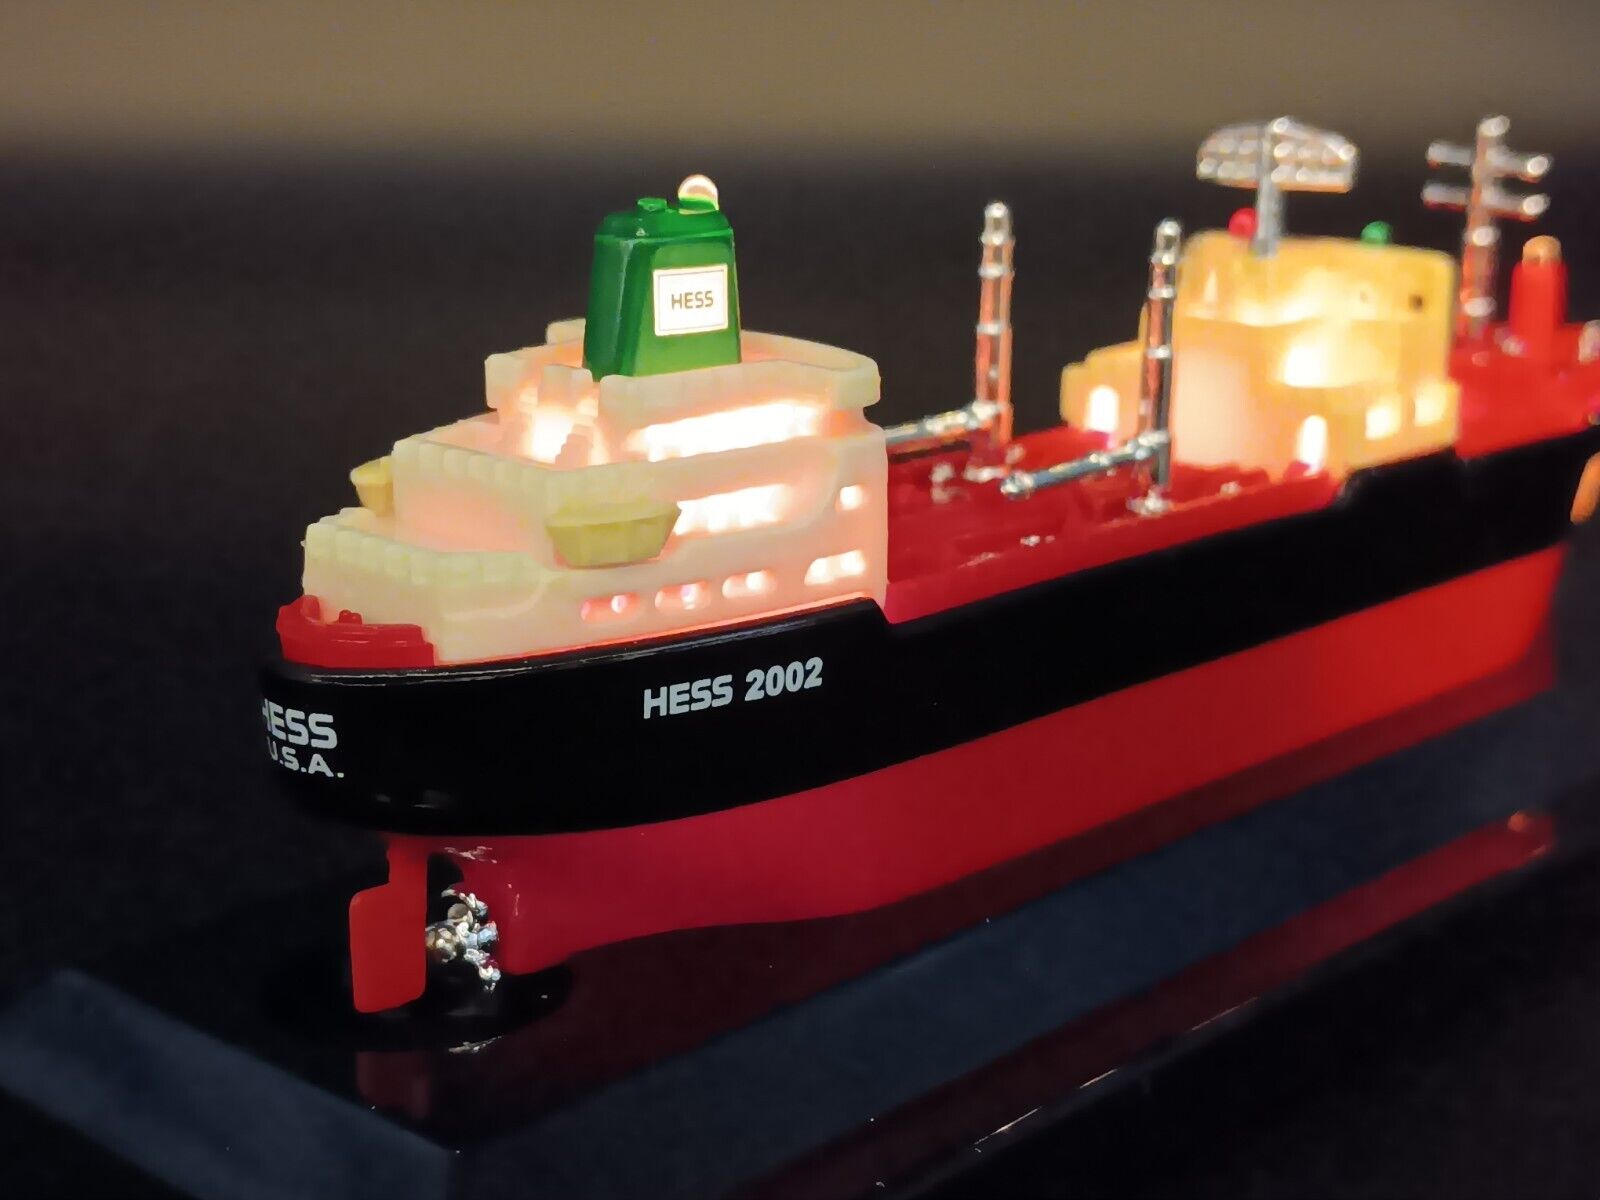 HESS SHIP MINIATURE VOYAGER OIL TANKER 2002 TOY SHIP Out of Hess Master Carton